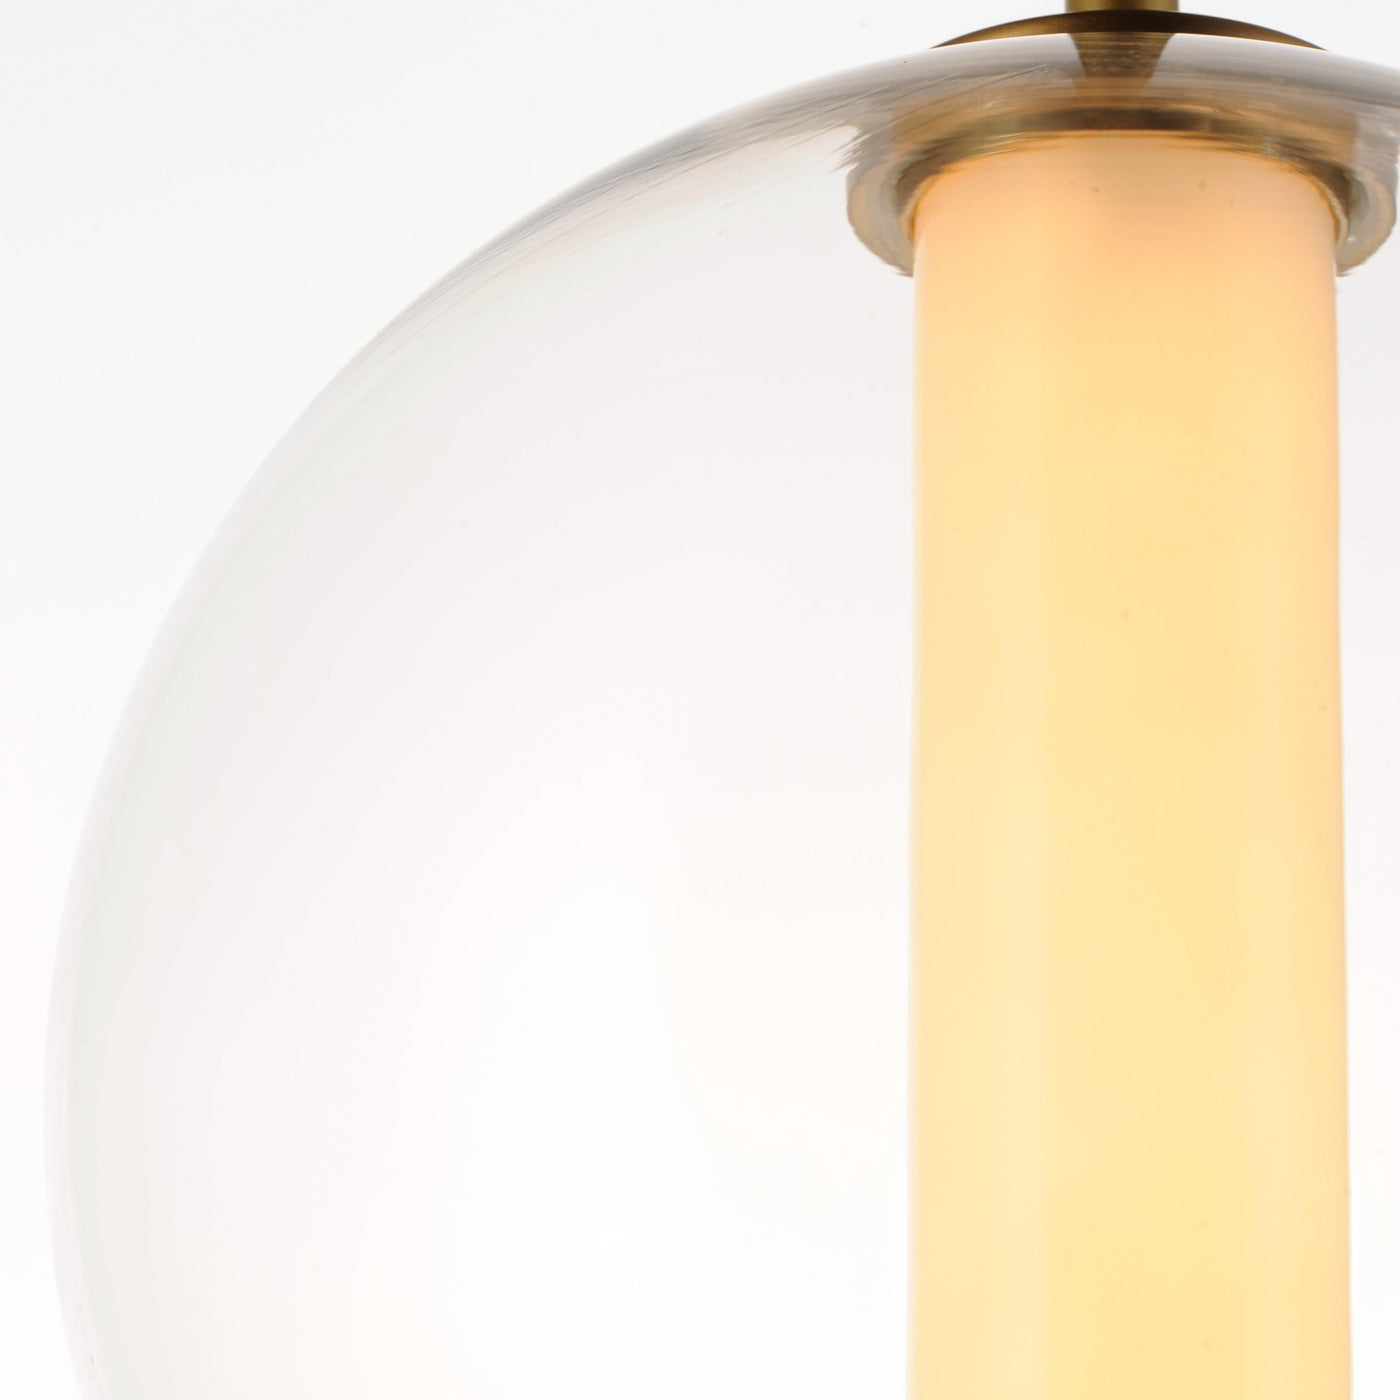 LED Gold with Clear Glass Globe Diffused with White Acrylic Cylinder Pendant - LV LIGHTING